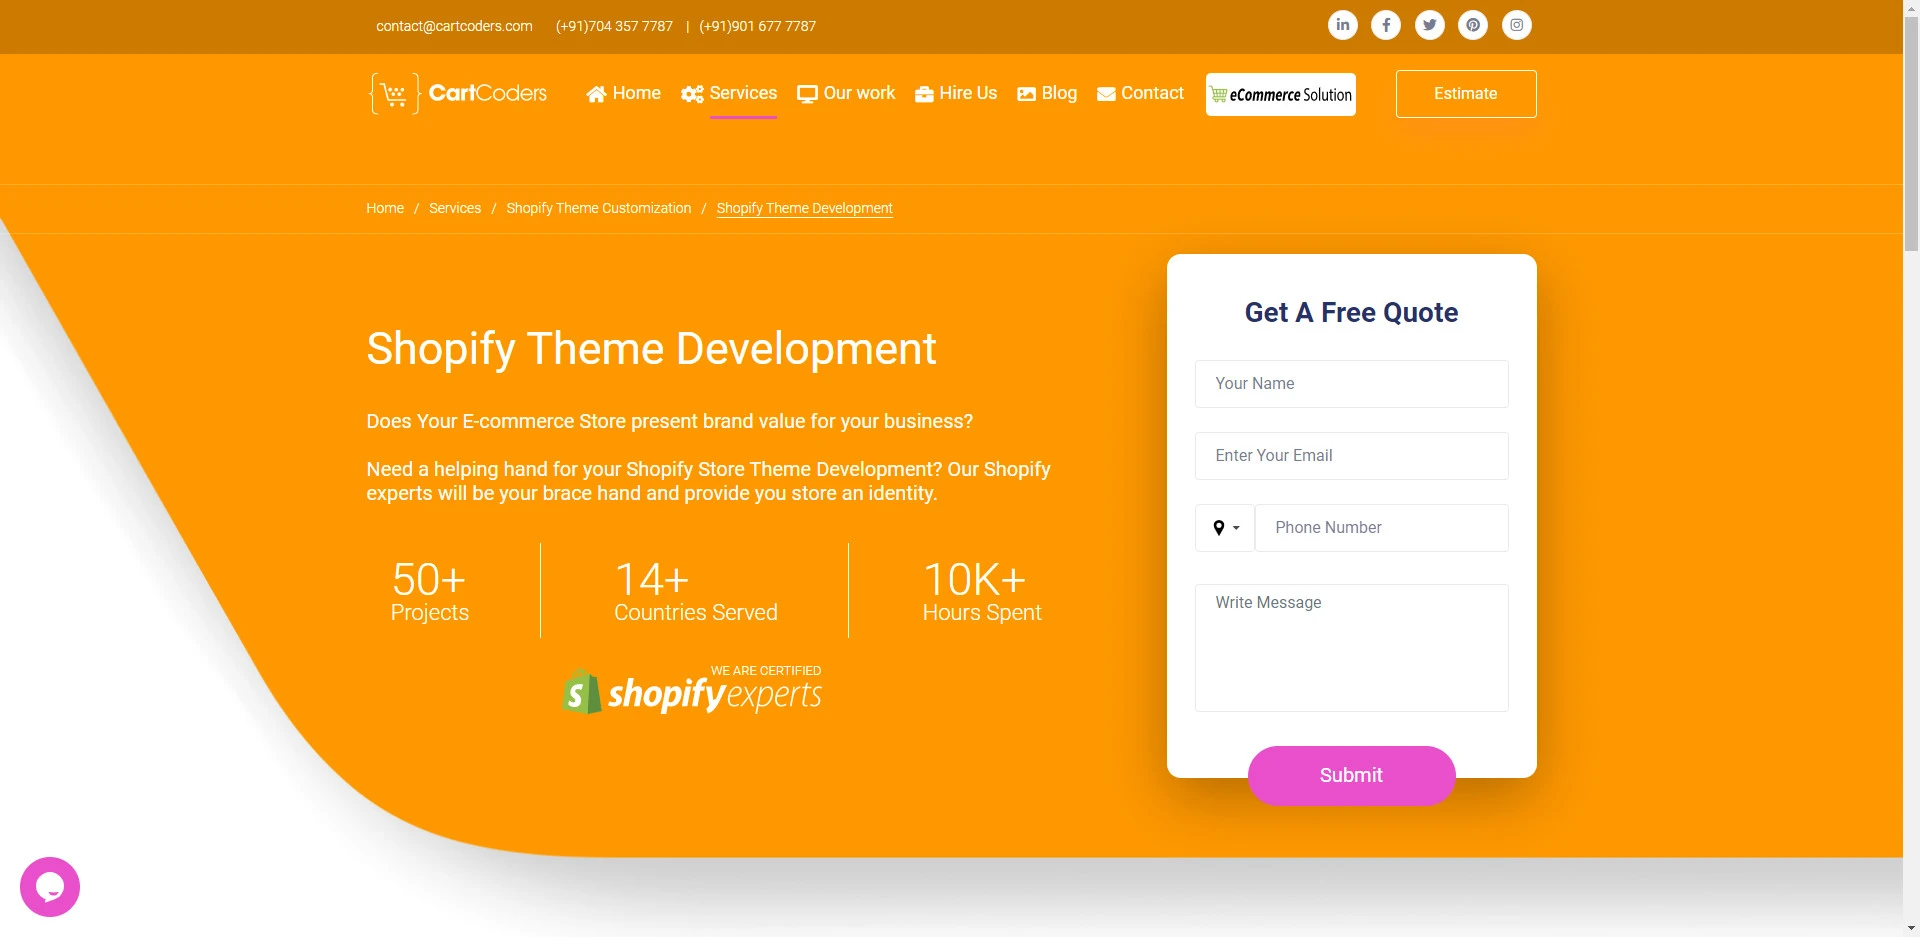 why-Cartcoders-for-Shopify-theme-development